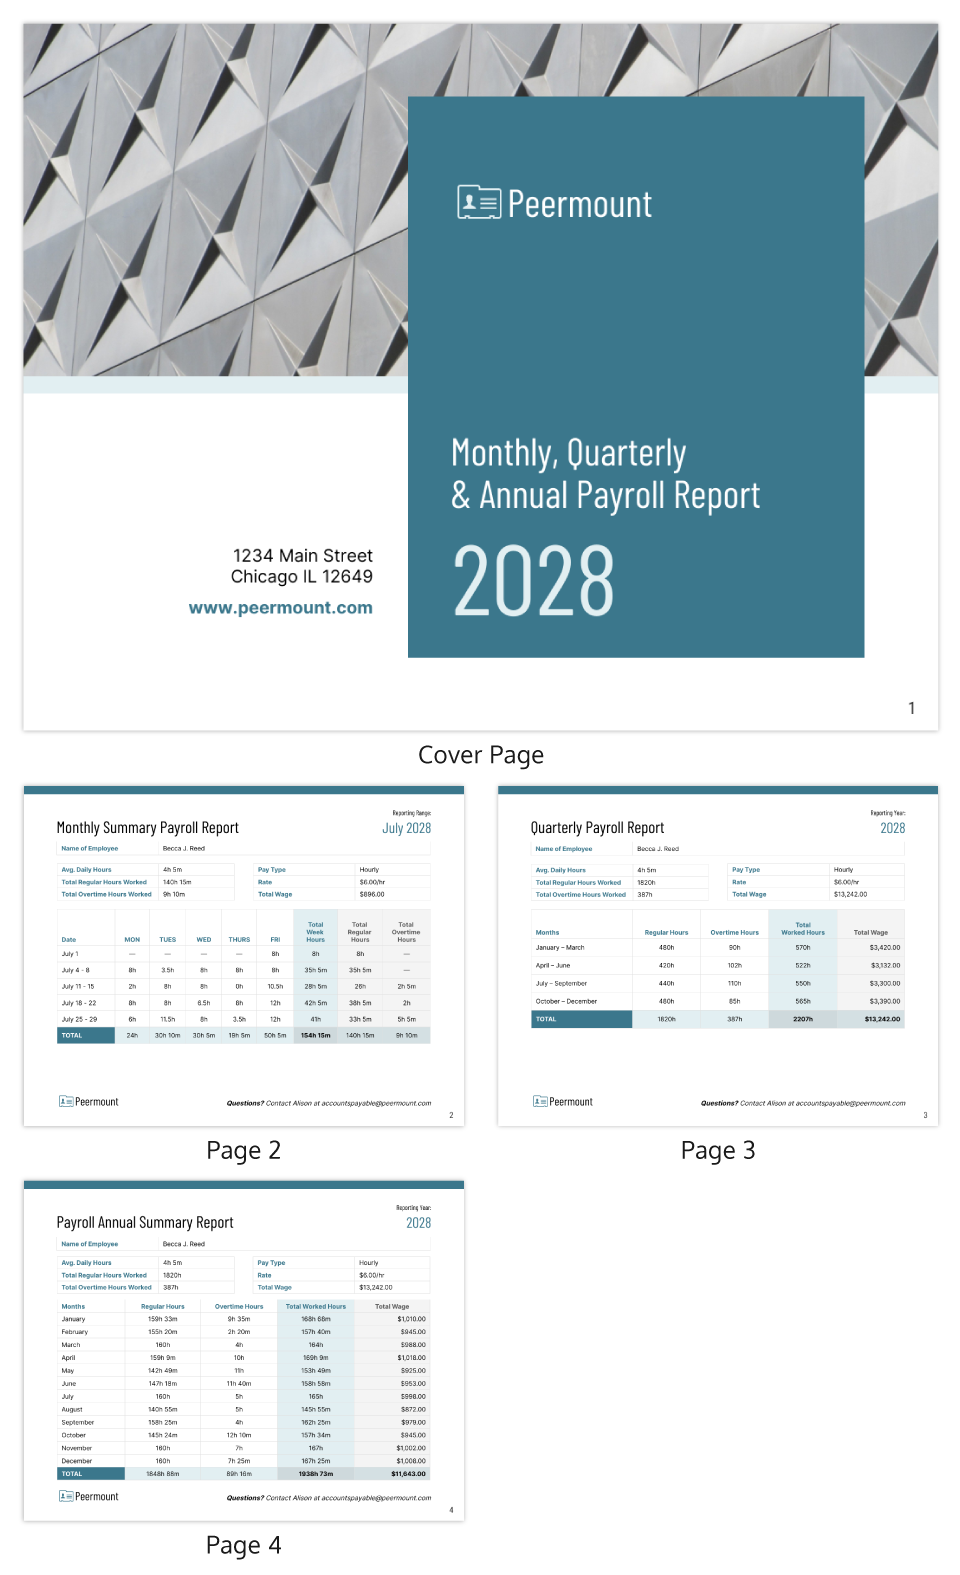 Peermount's 2028 payroll report: Cover with geometric design and company details; Page 2 details monthly hours for July; Page 3 shows quarterly totals; Page 4 provides an annual summary by month. Predominantly blue theme with tables and text.